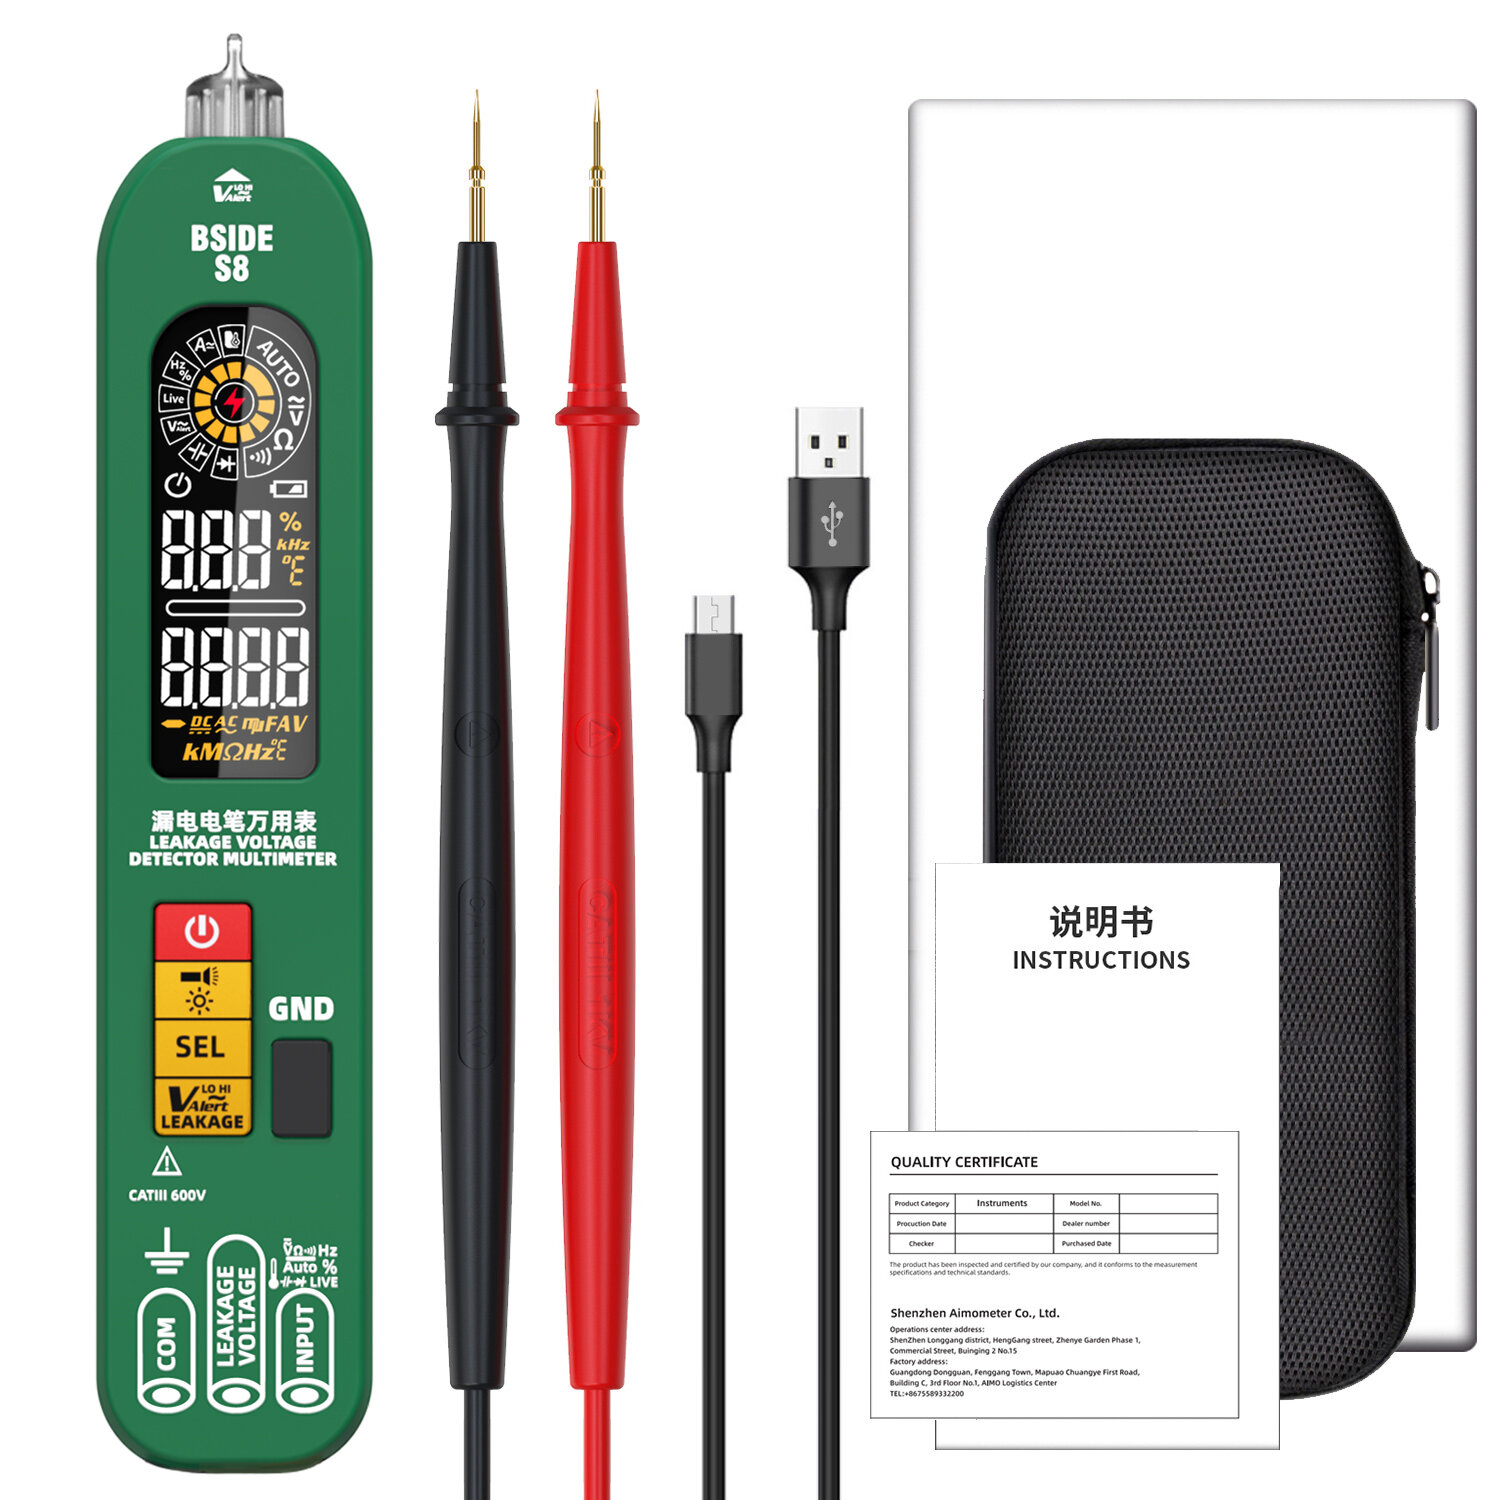 

BSIDE S8 Multimeter High Precision Testing Tool DC/AC Voltage Resistance Capacitance Frequency Temperature Measurements